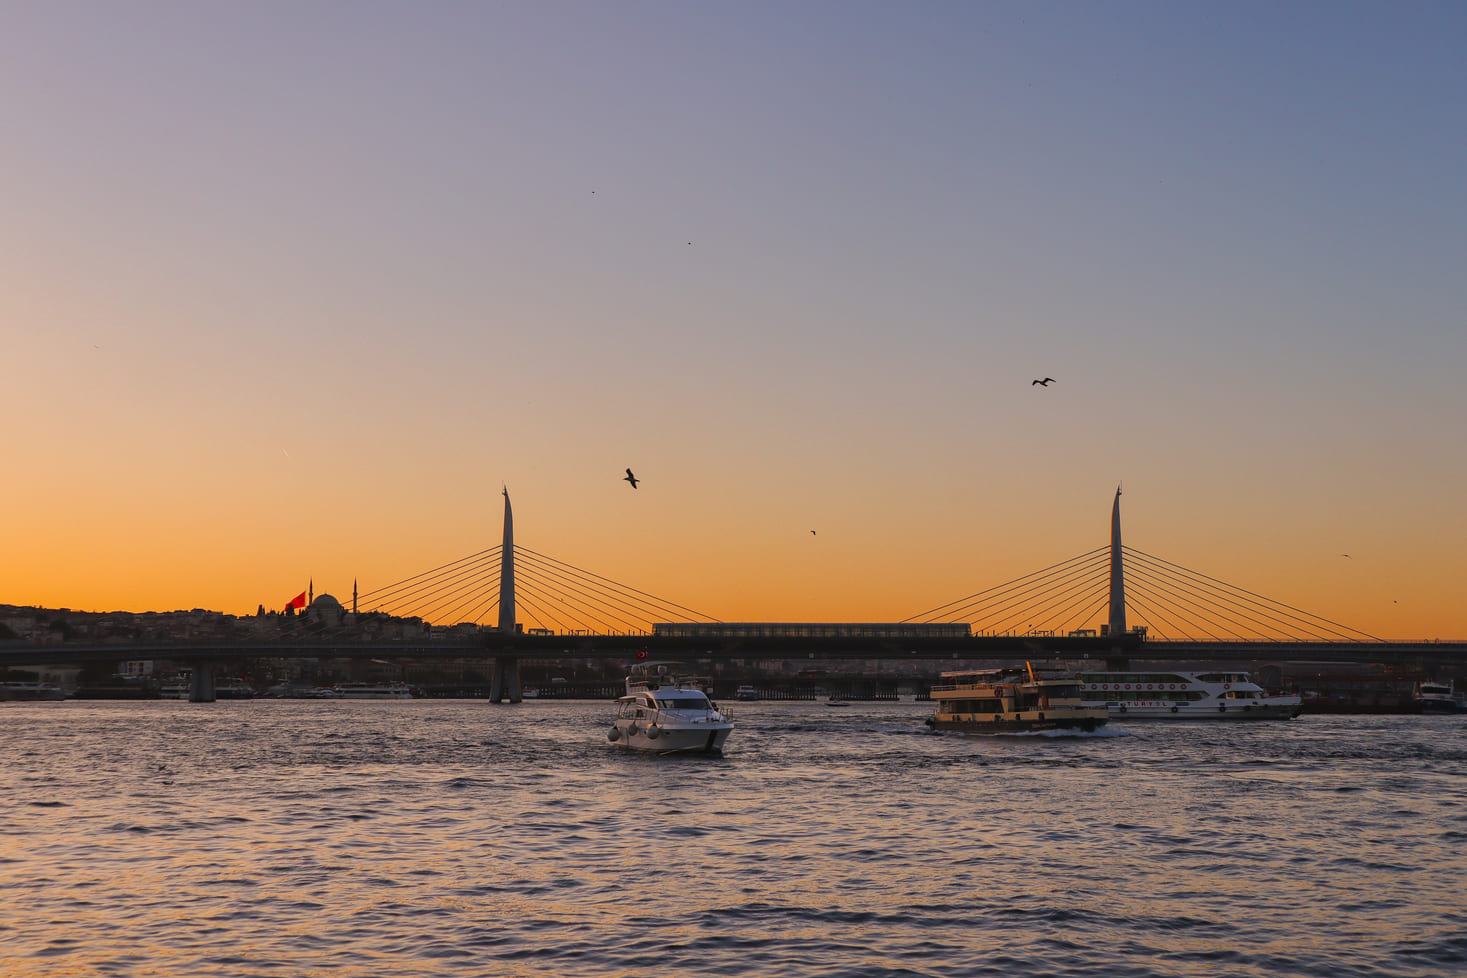 Things to see in Istanbul in 3 days